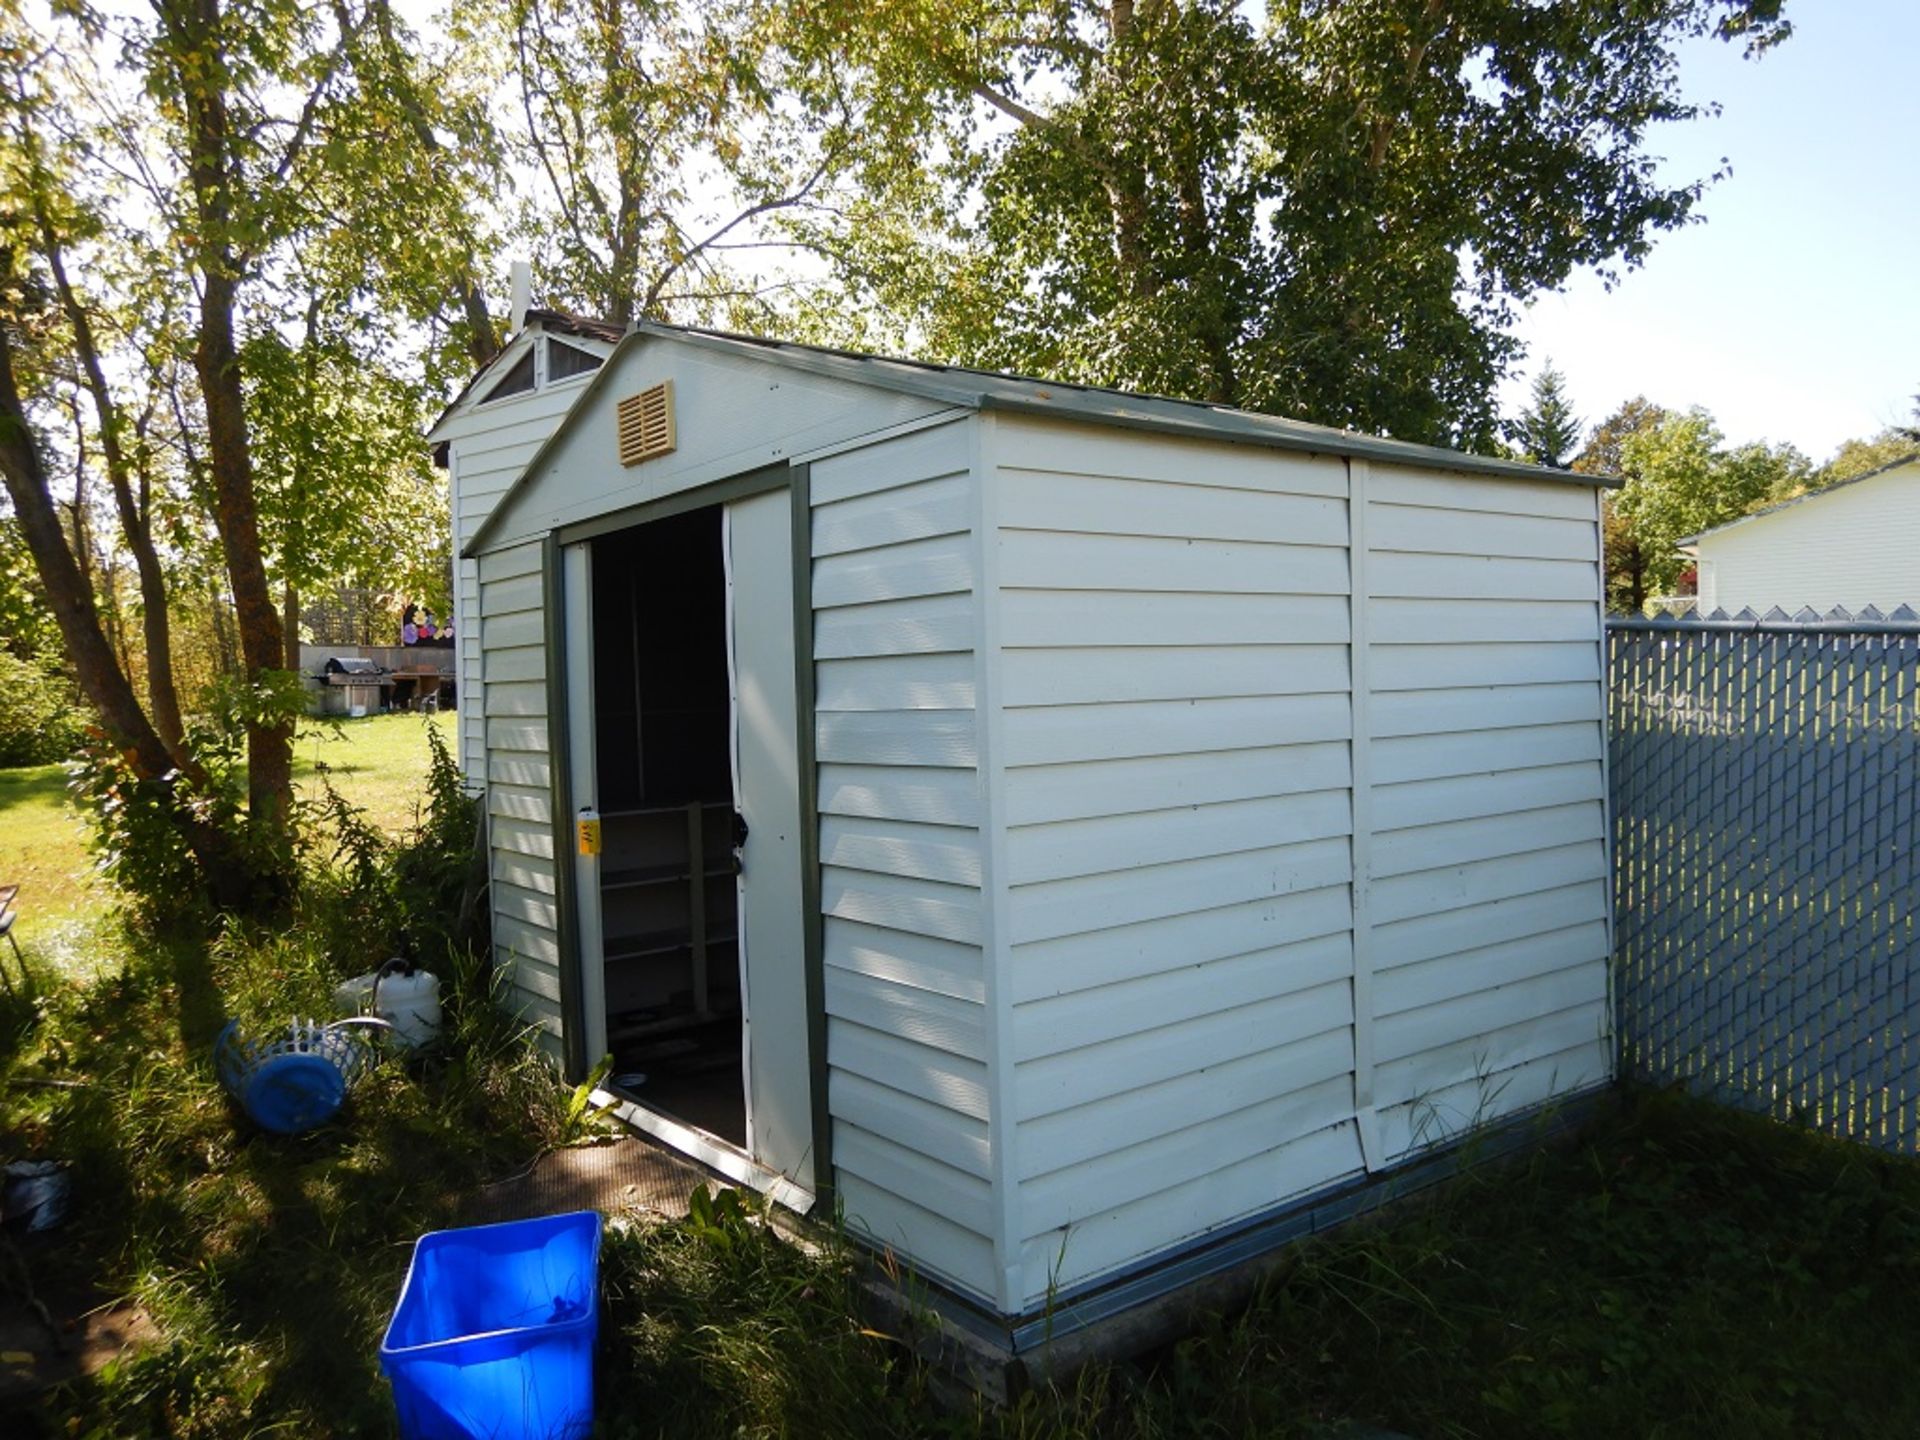 8'X10' METAL GARDEN SHED - Image 2 of 3